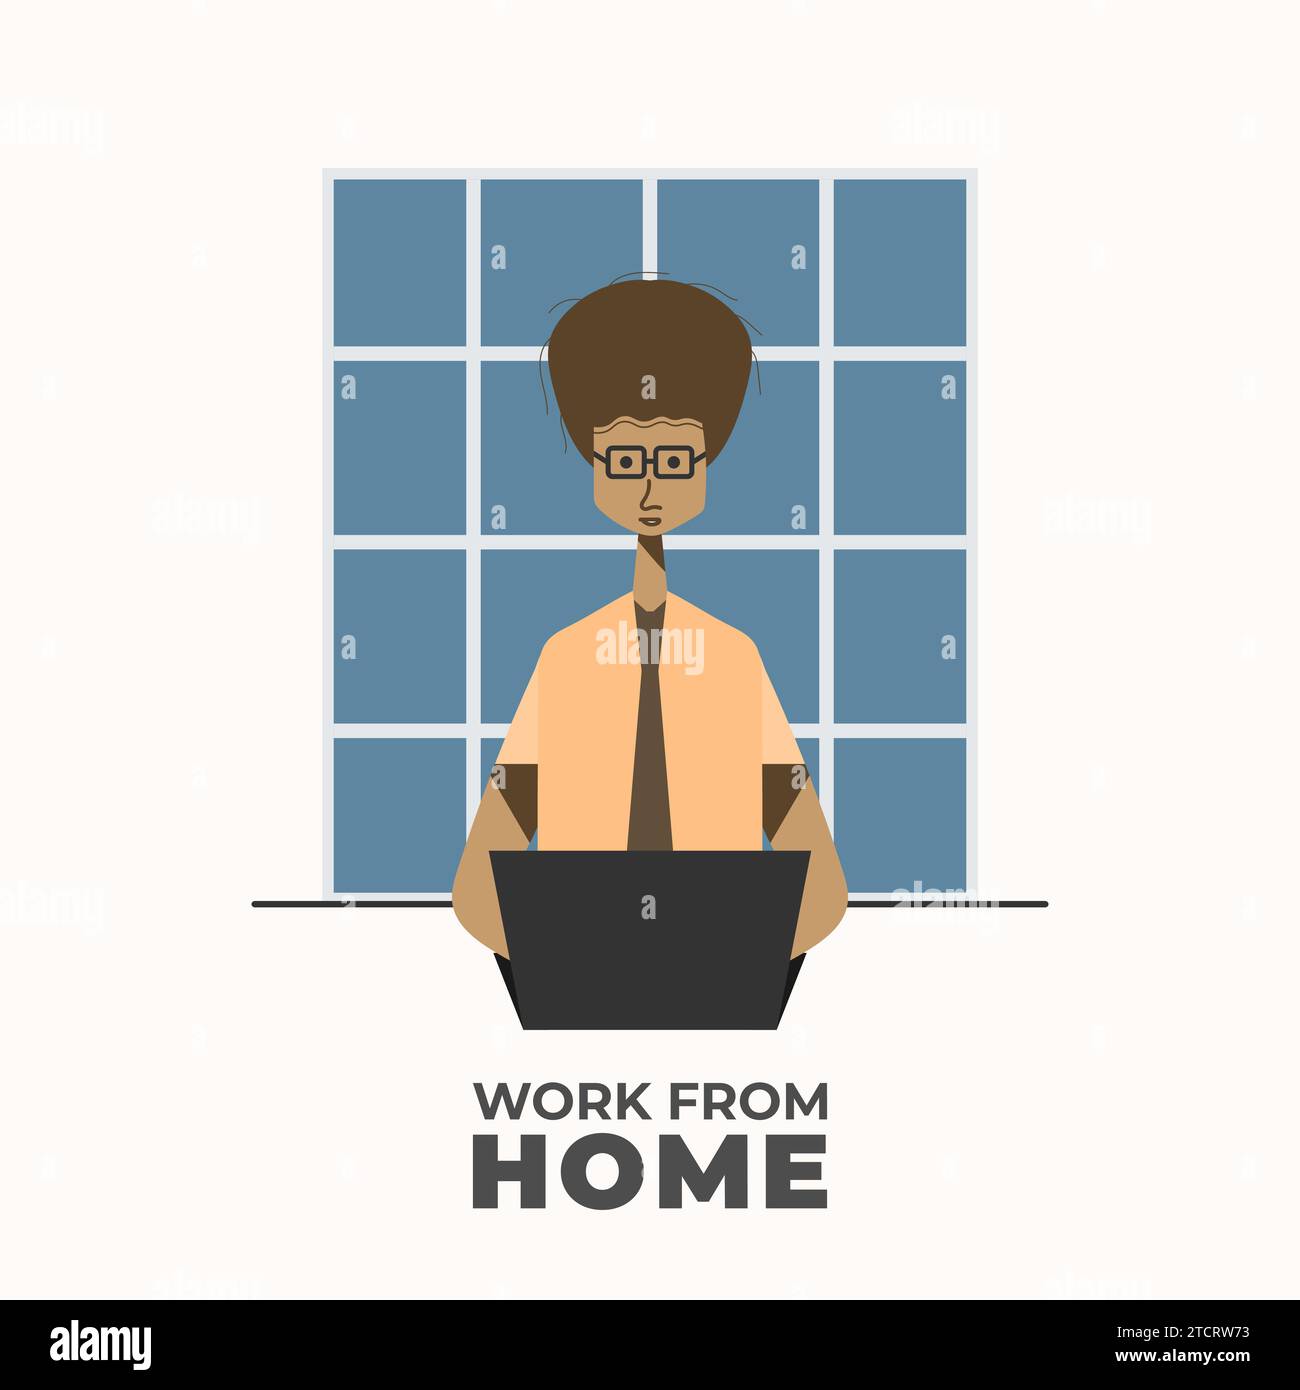 Work From Home Illustration Concept. Freelancer Working on Laptop at Home Stock Vector